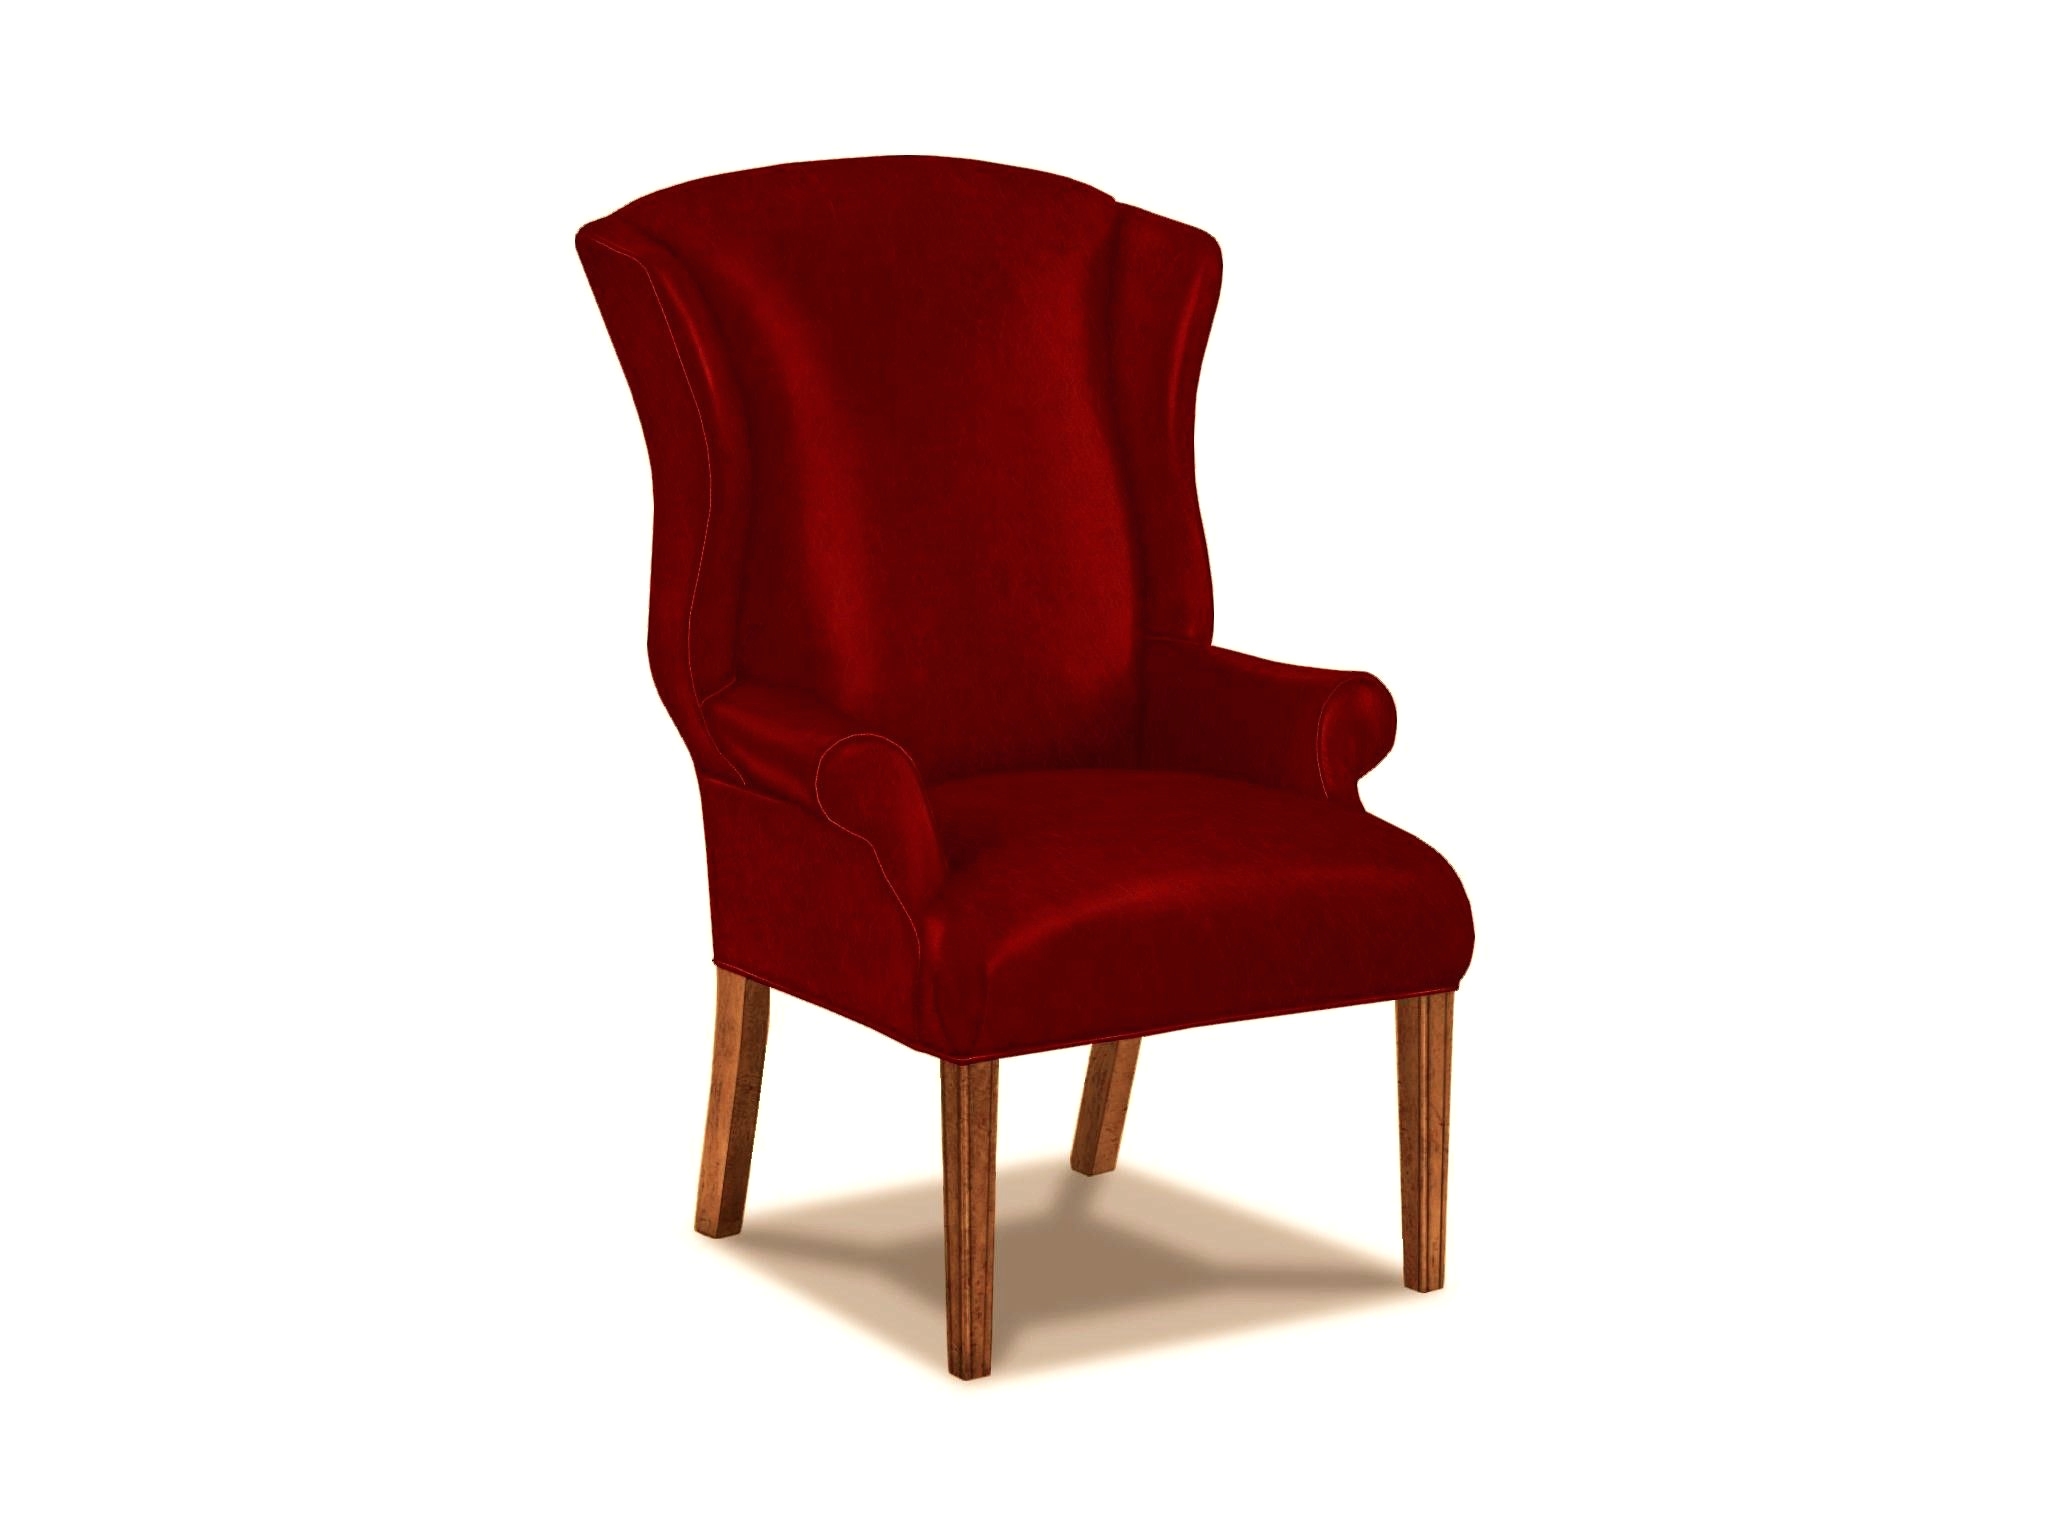 shop ethan allen s collection of living room accent chairs and chaise chairs in fabric leather